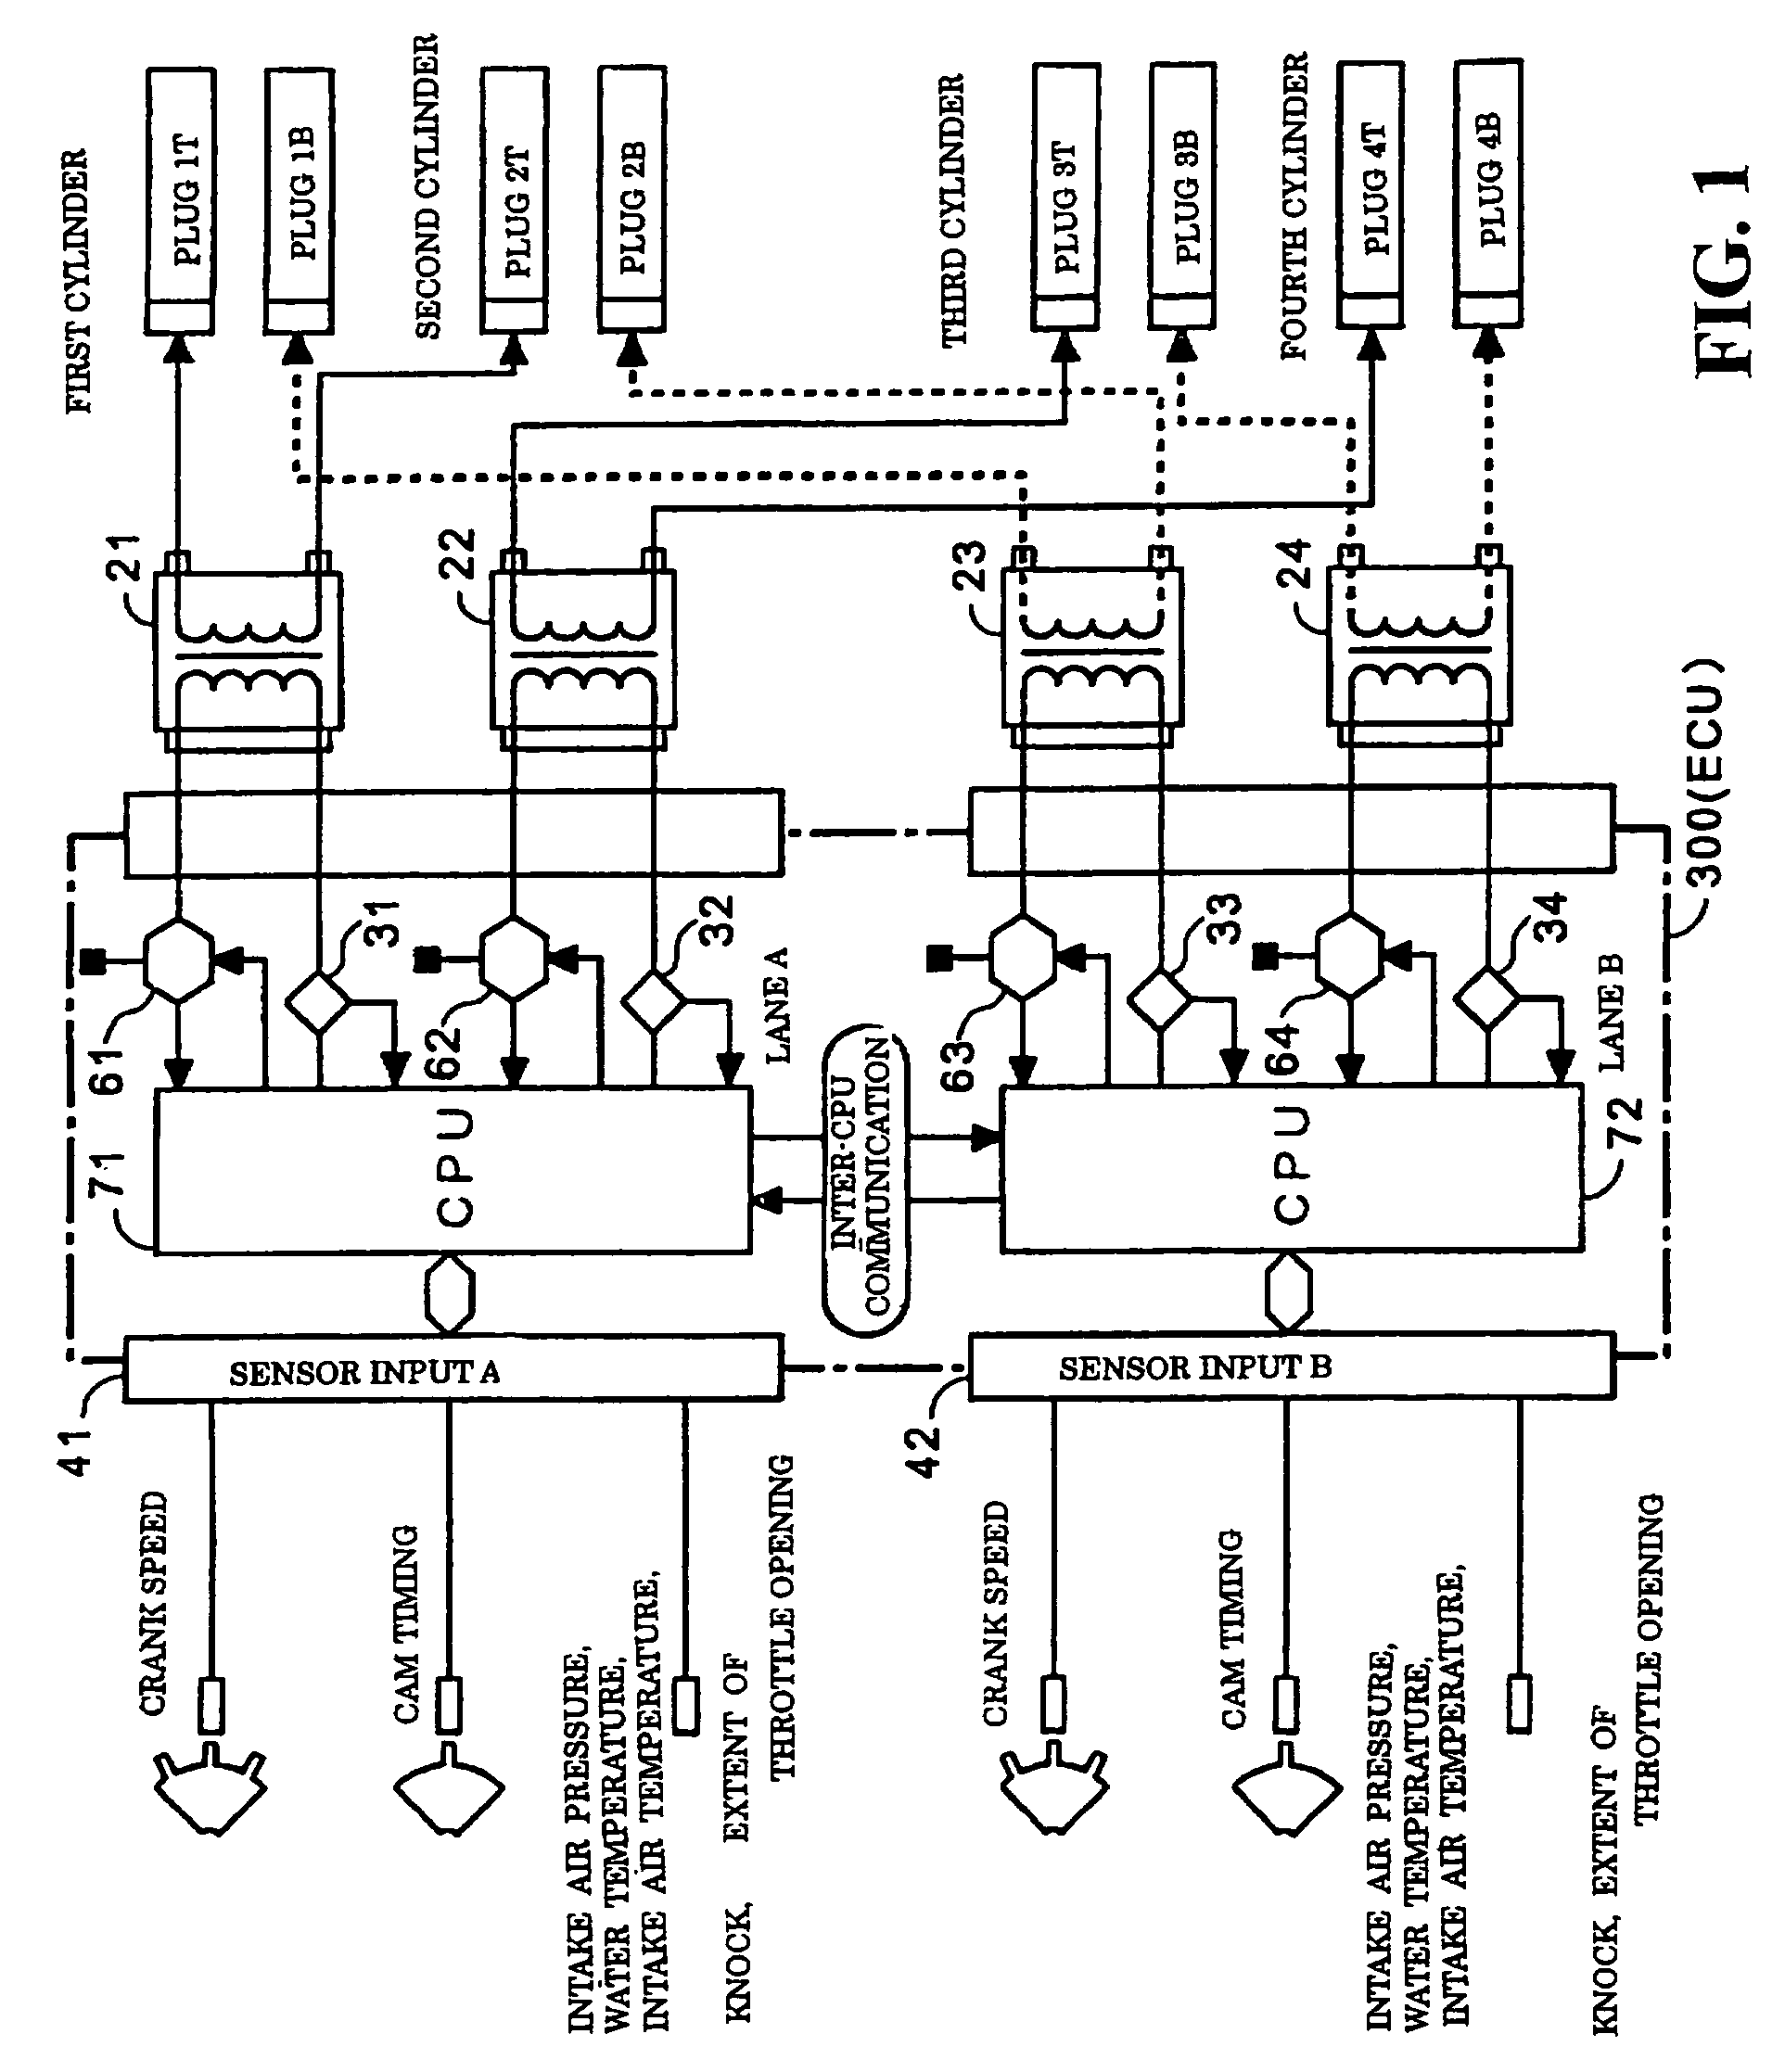 Electronic control device for aviation engine